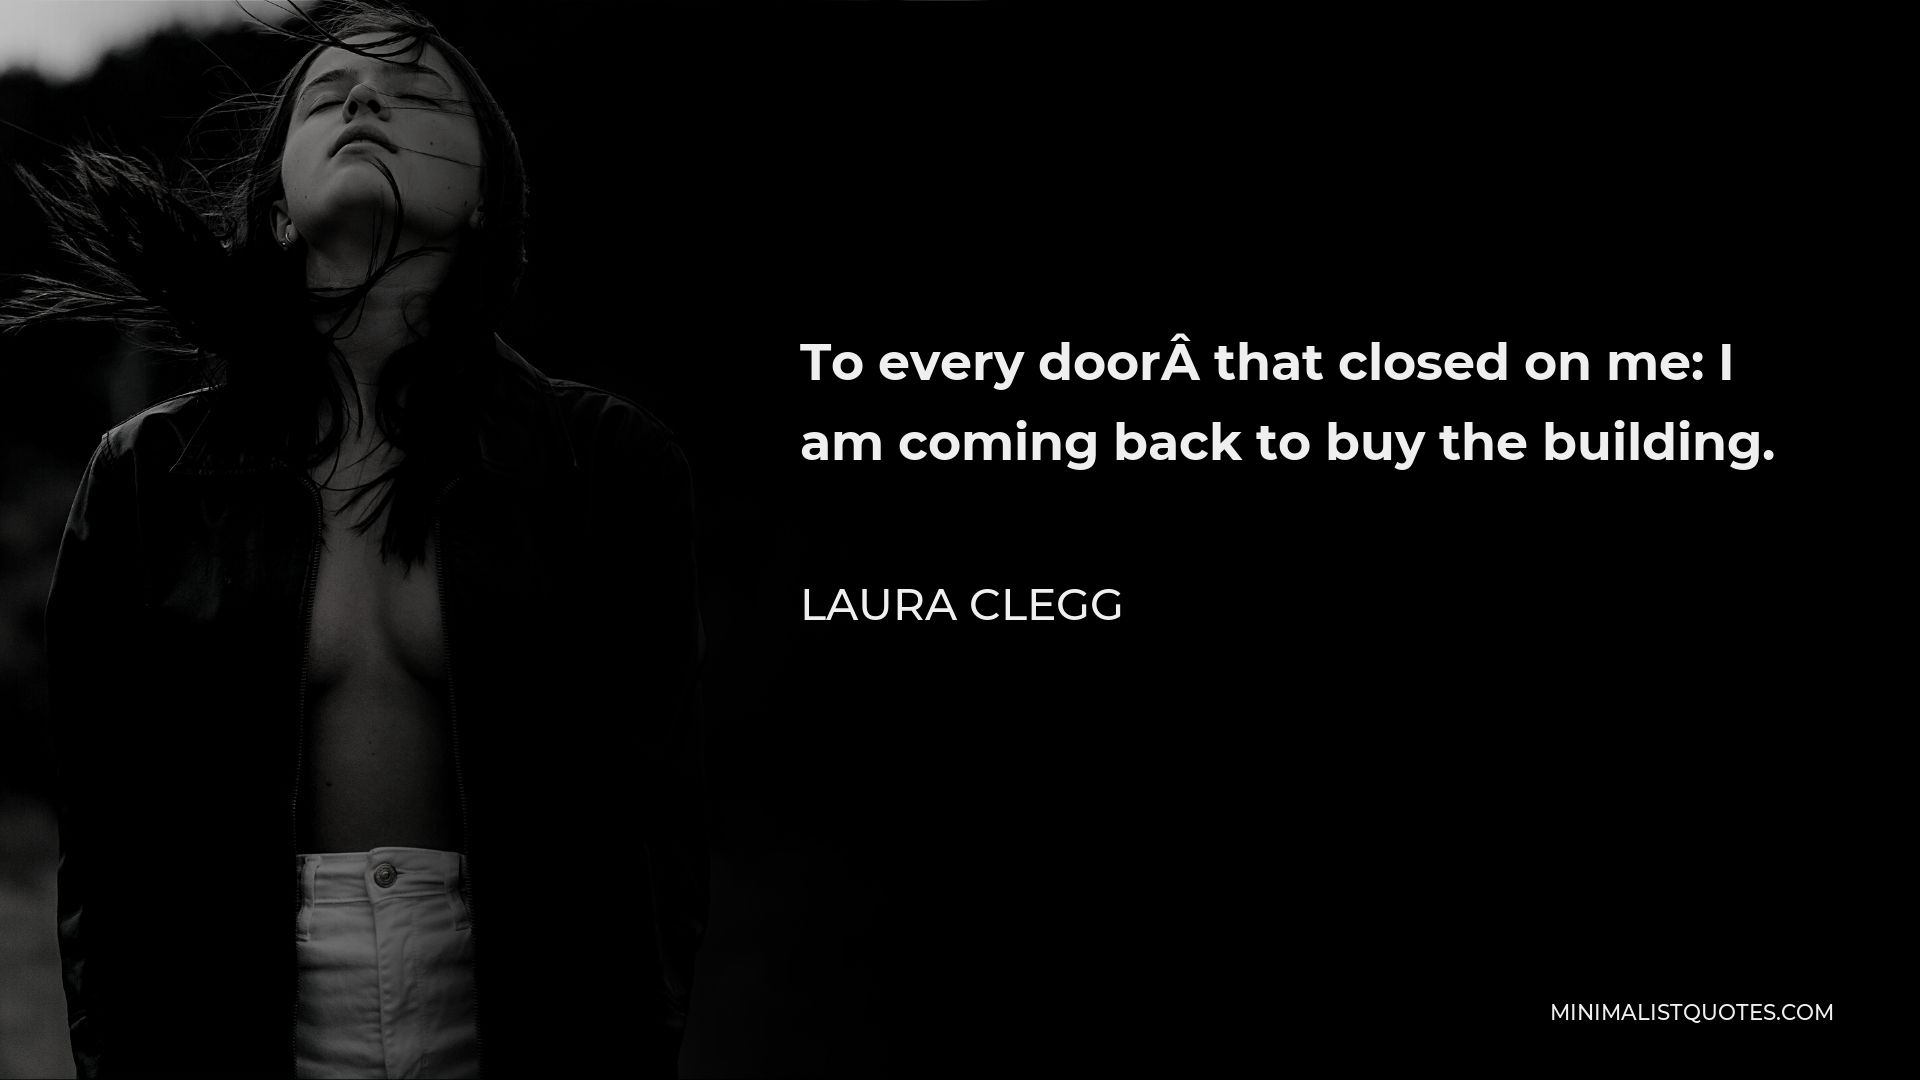 Laura Clegg Quote - To every door that closed on me: I am coming back to buy the building.